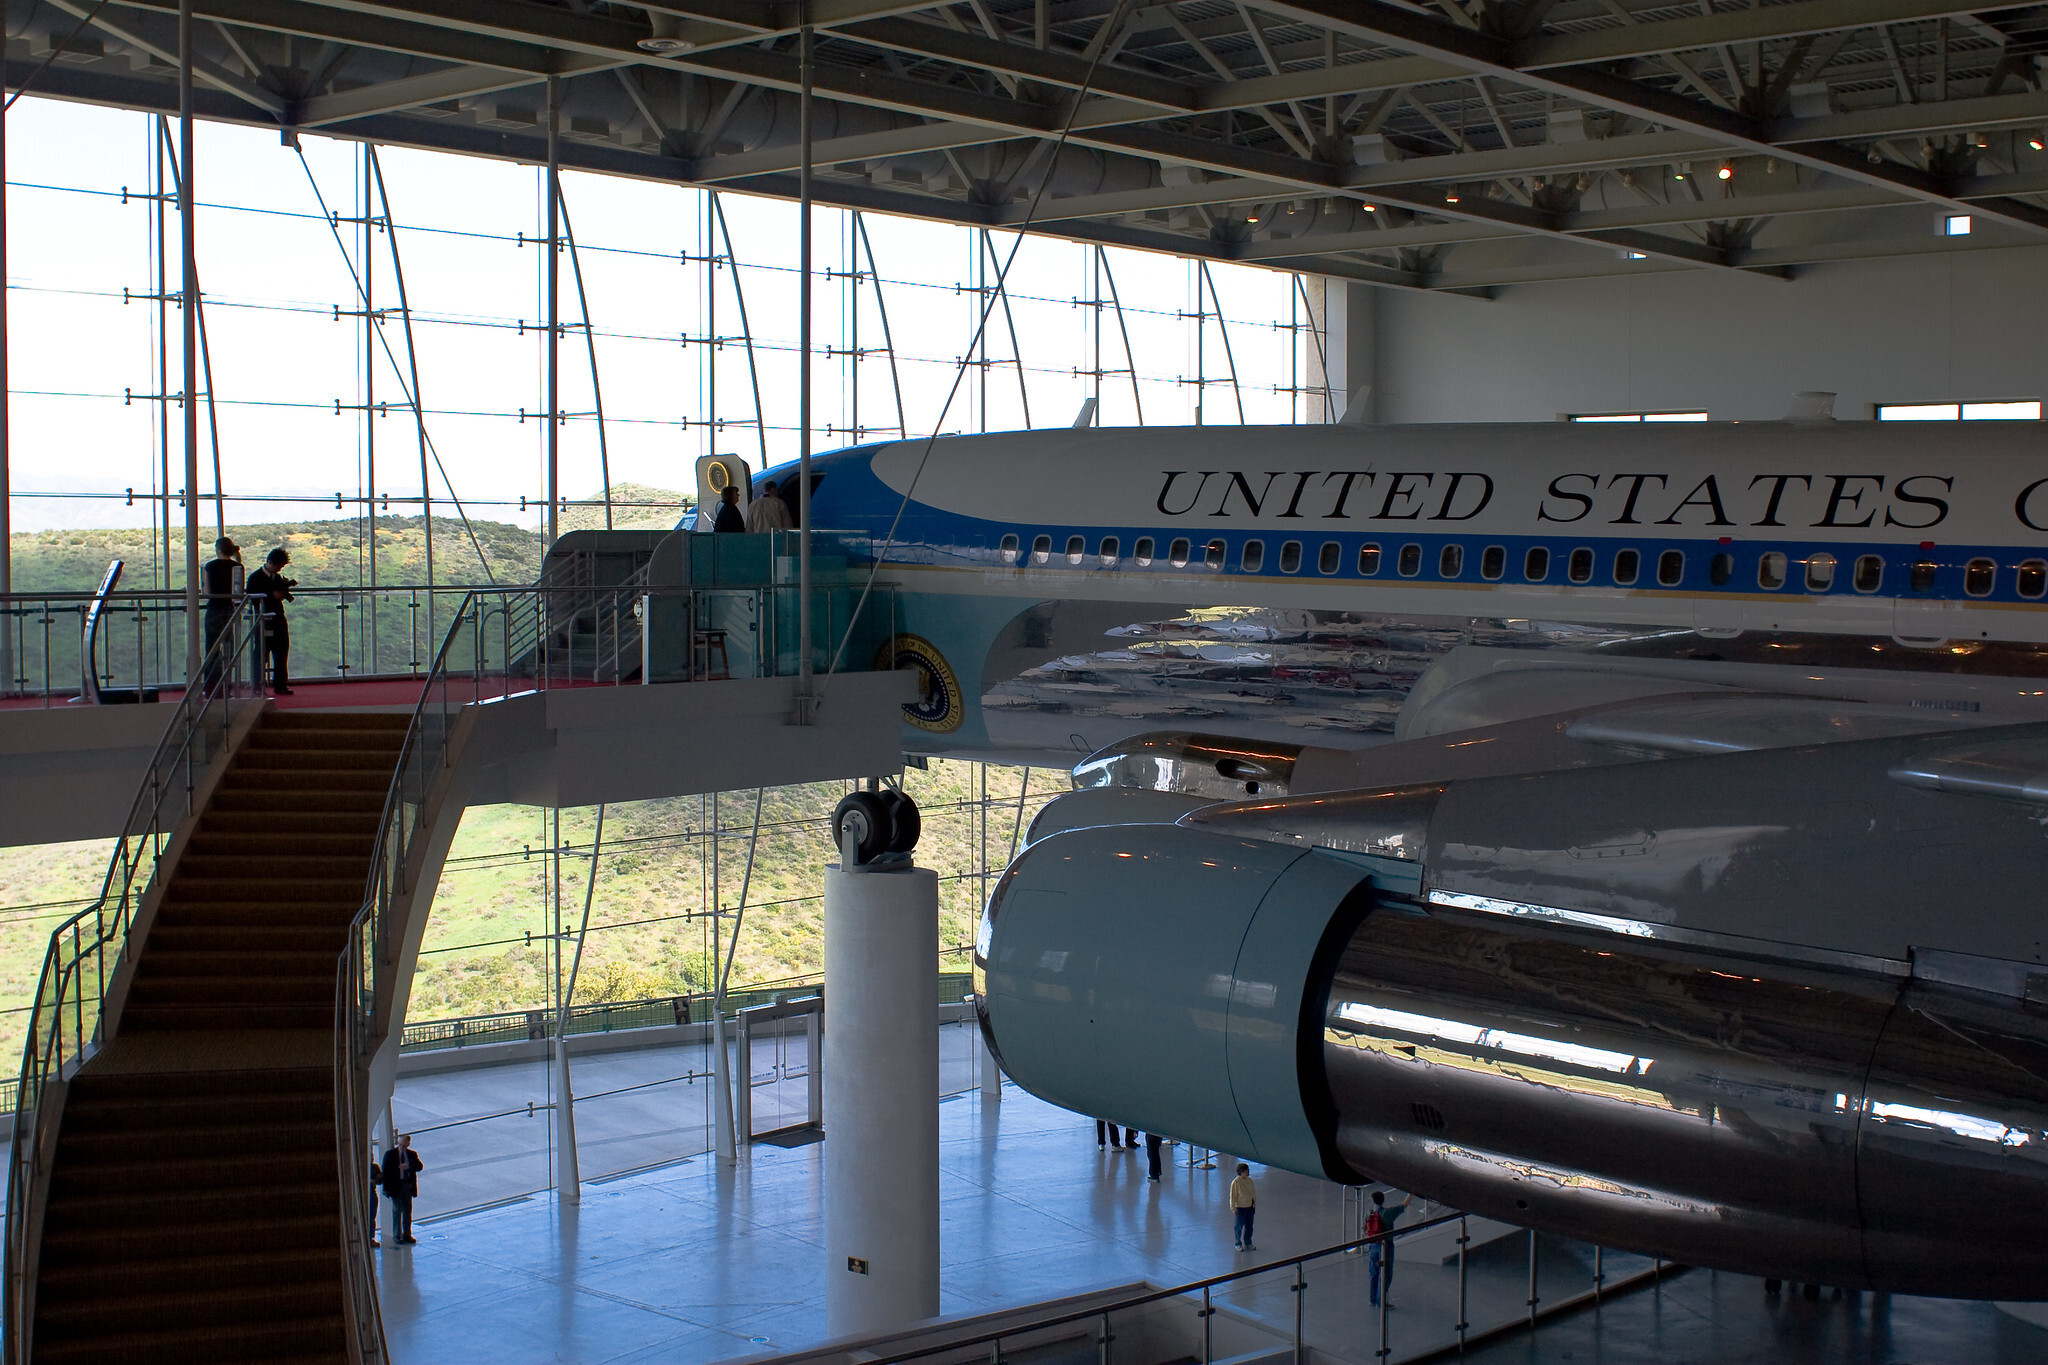 Air Force One - 27000 at the Reagan Library